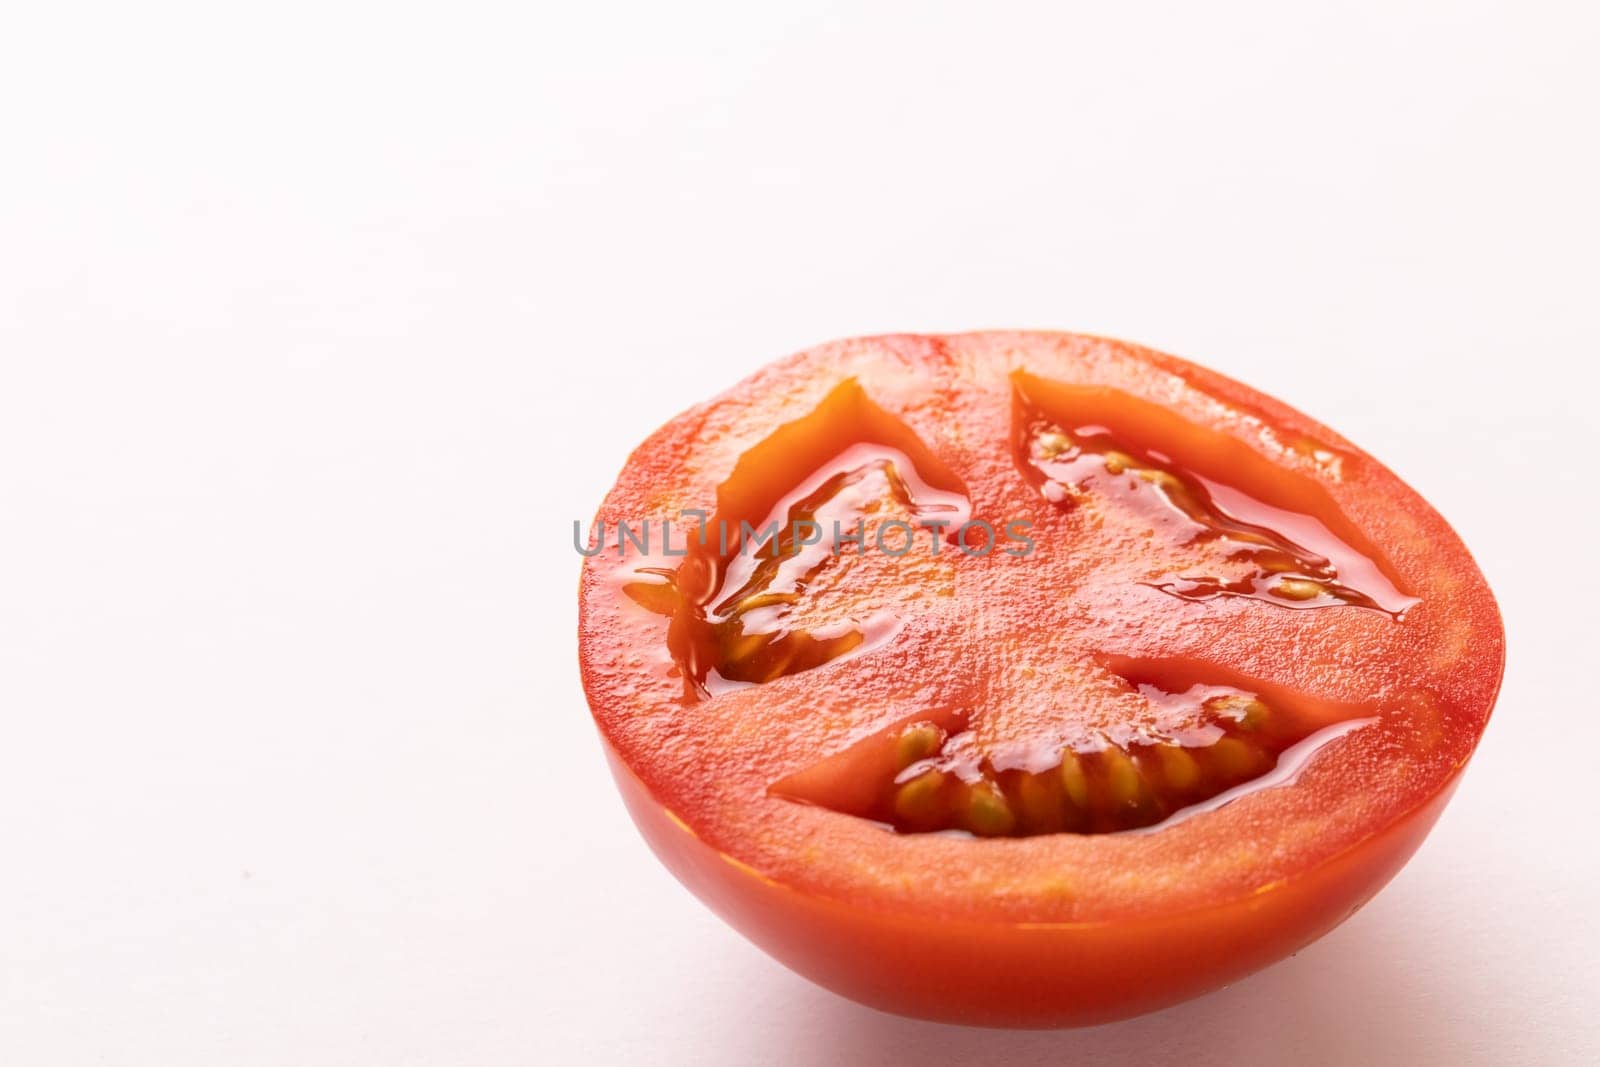 Close-up of fresh single red tomato half by copy space on white background by Wavebreakmedia